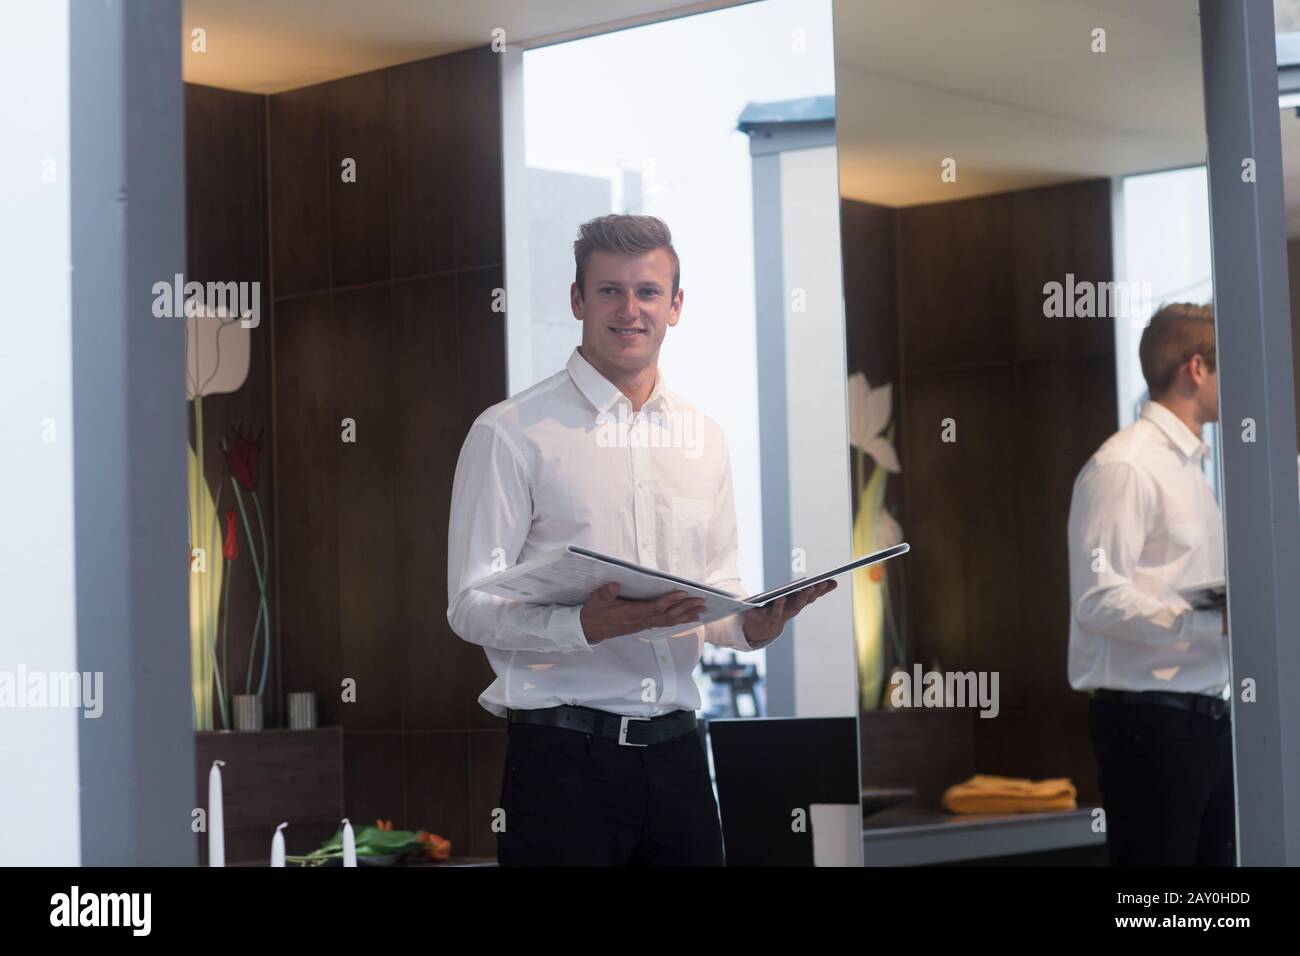 Smiling Salesman standing in a shop holding a sales brochure, Germany Stock Photo